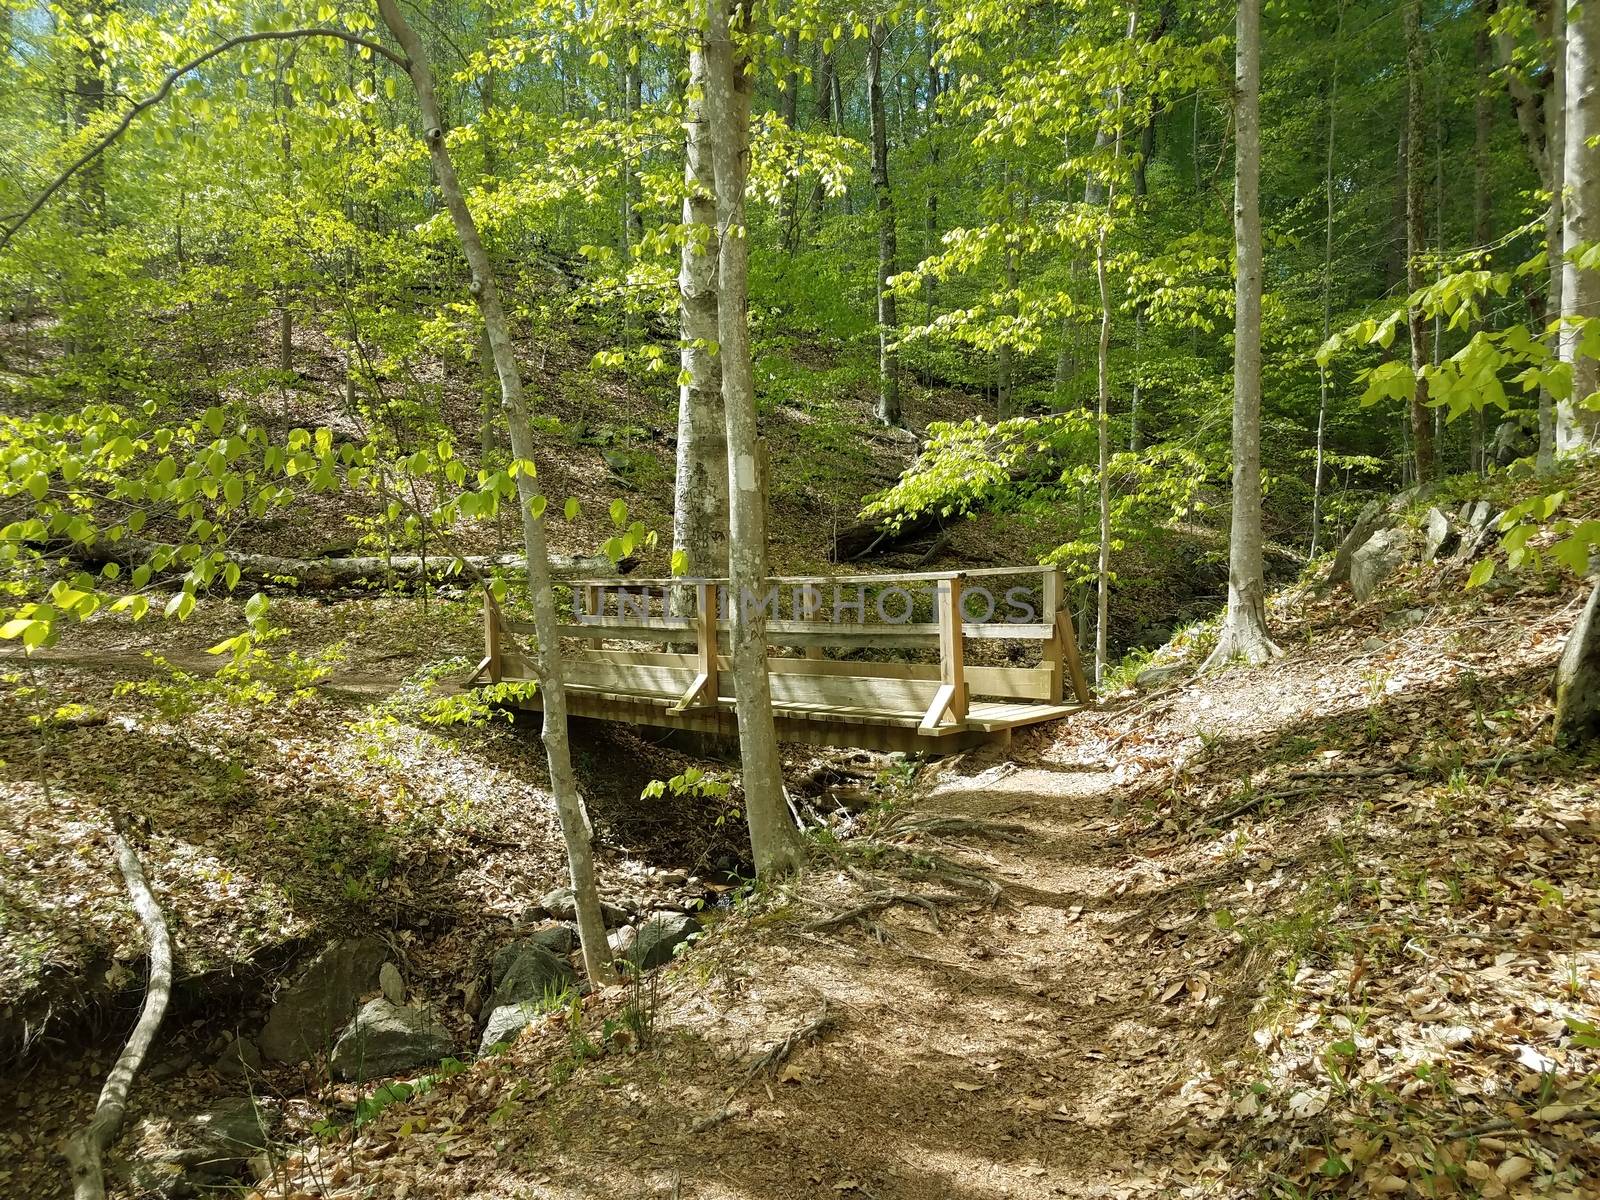 wood bridge over creek on trail in forest or woods with trees